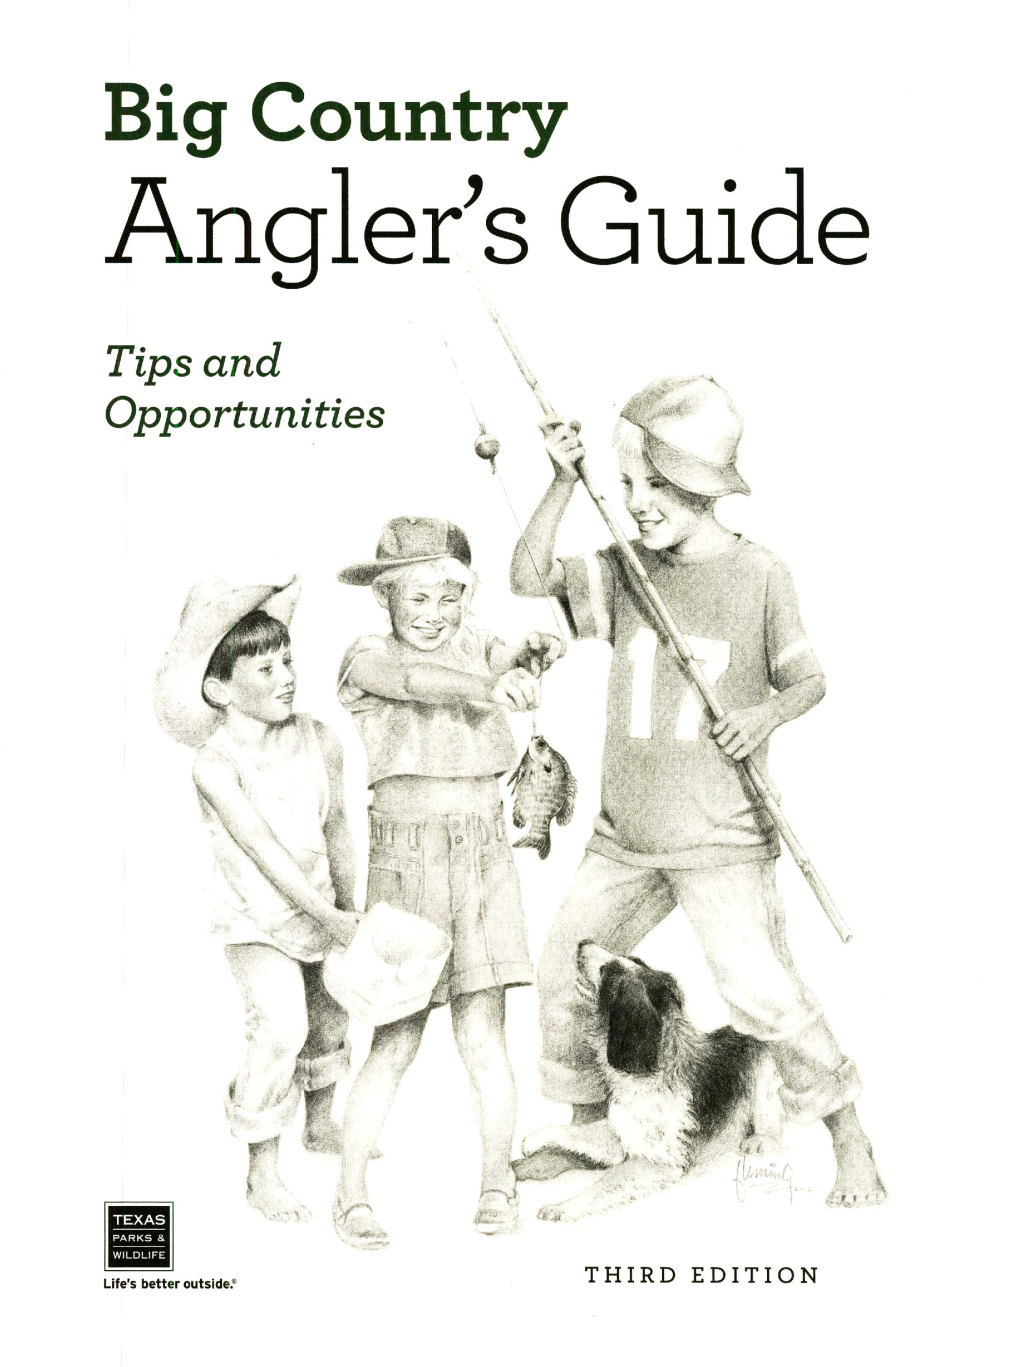 Big Country Angler's Guide: Tips and Opportunities